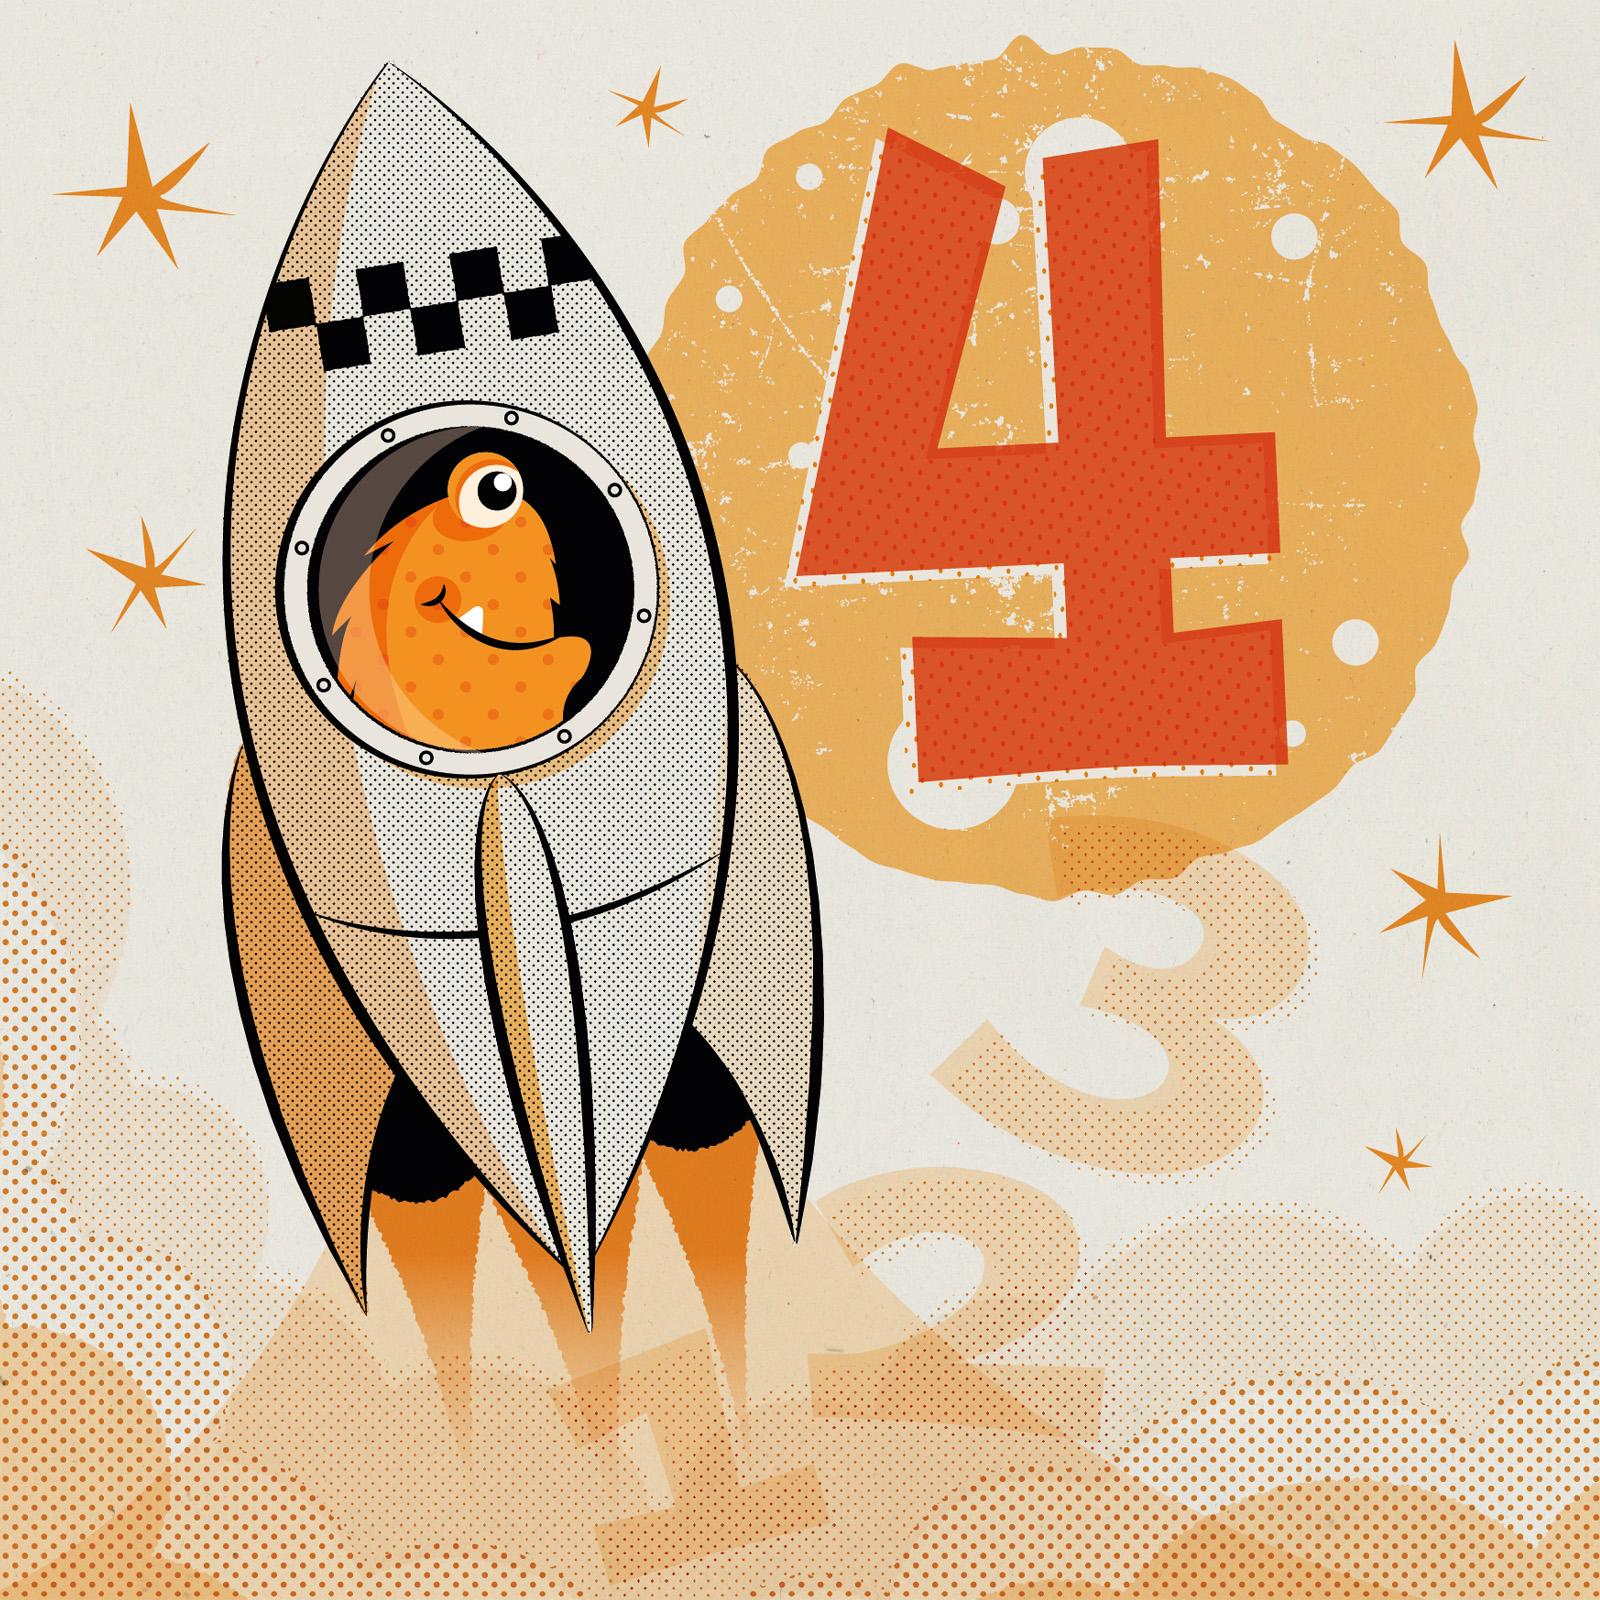 orange furry alien blasting off in a grey retro 50s style rocket behind is an orange number 4 planet with a launch countdown underneath in pale orange